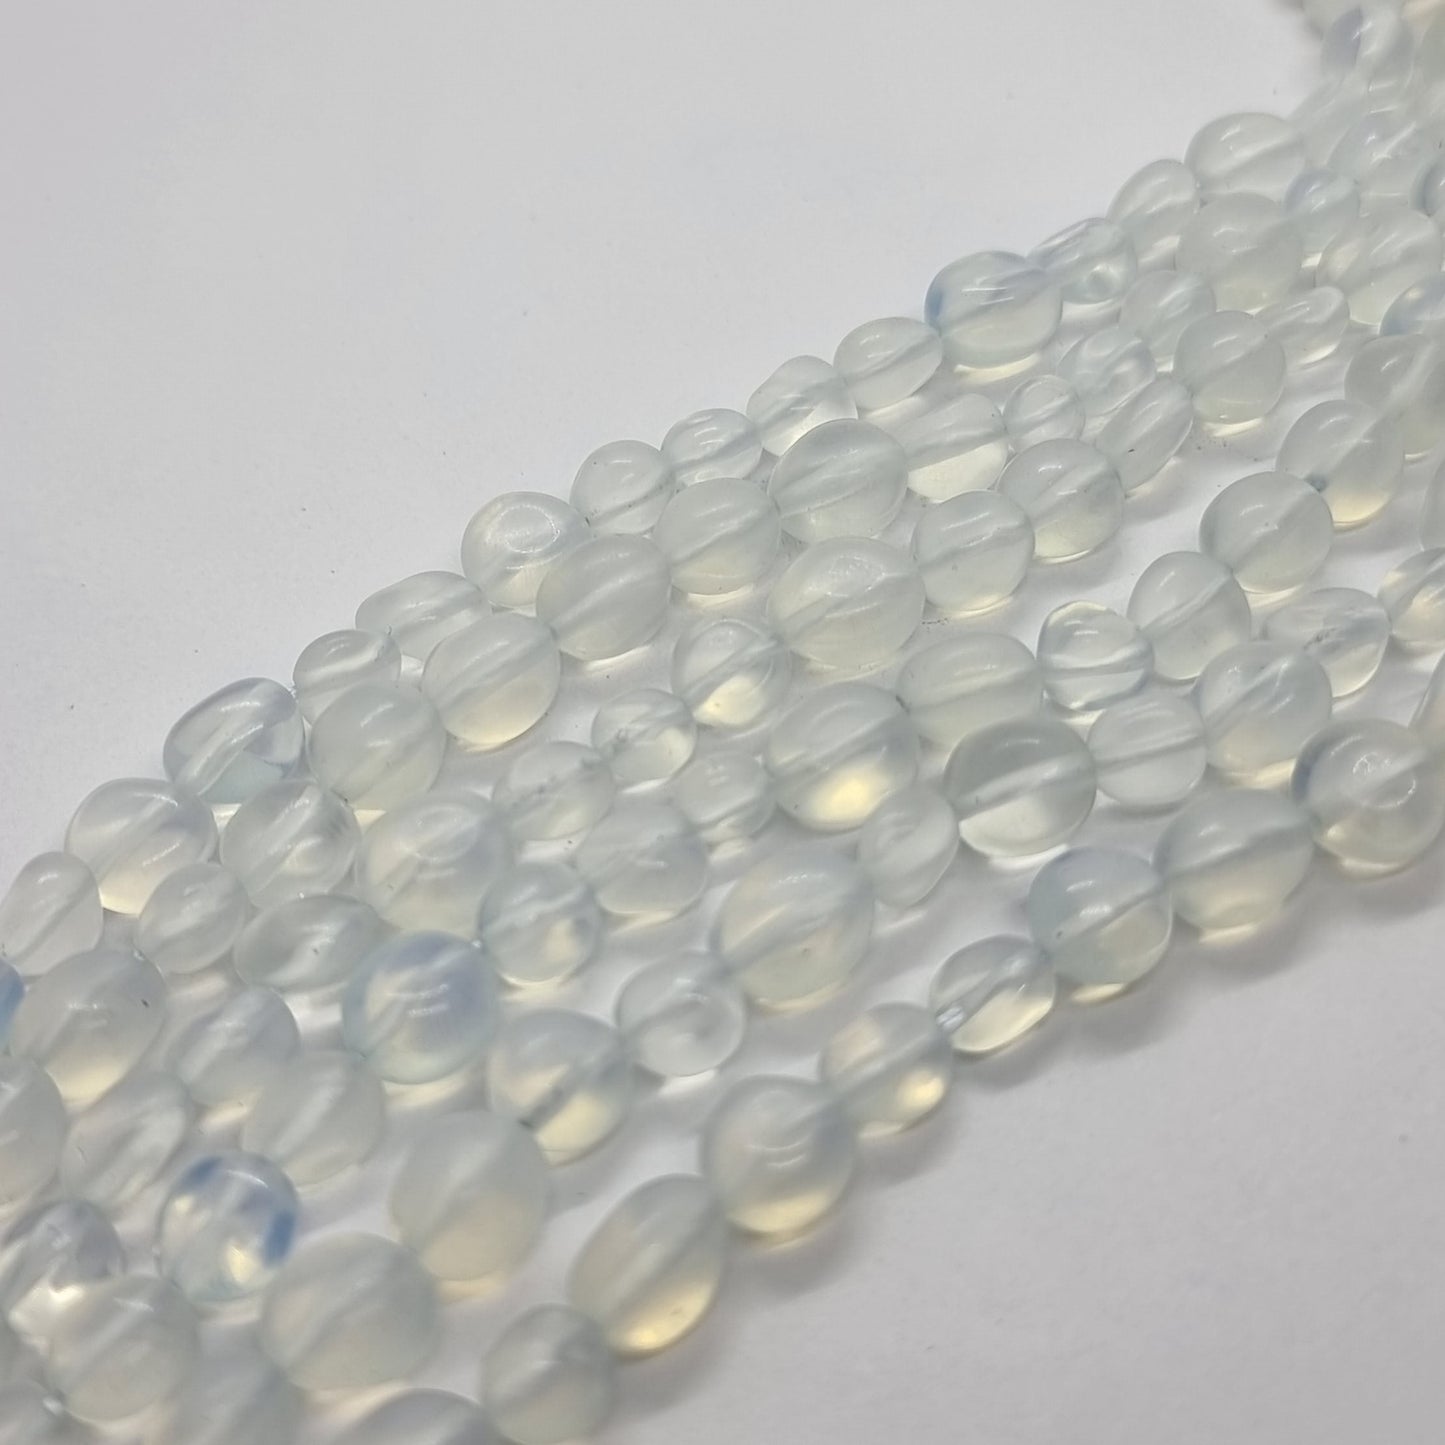 Opalite Nugget Beads